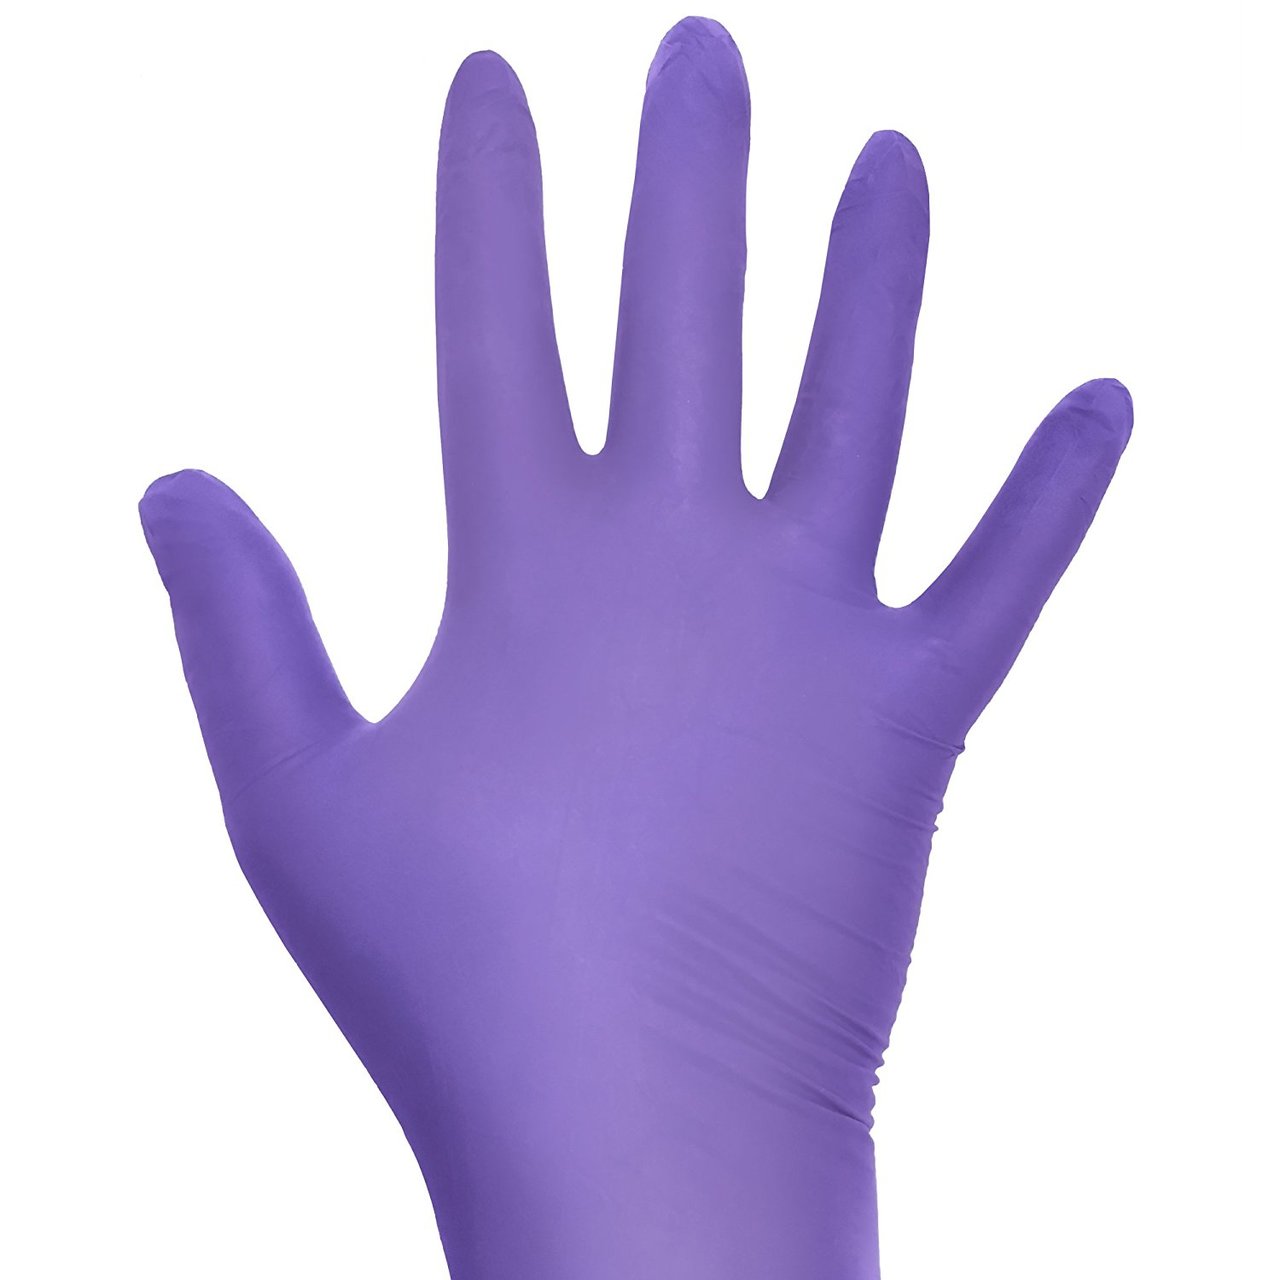 Kimberly Clark Purple Nitrile Disposable Gloves, (Box of 100)